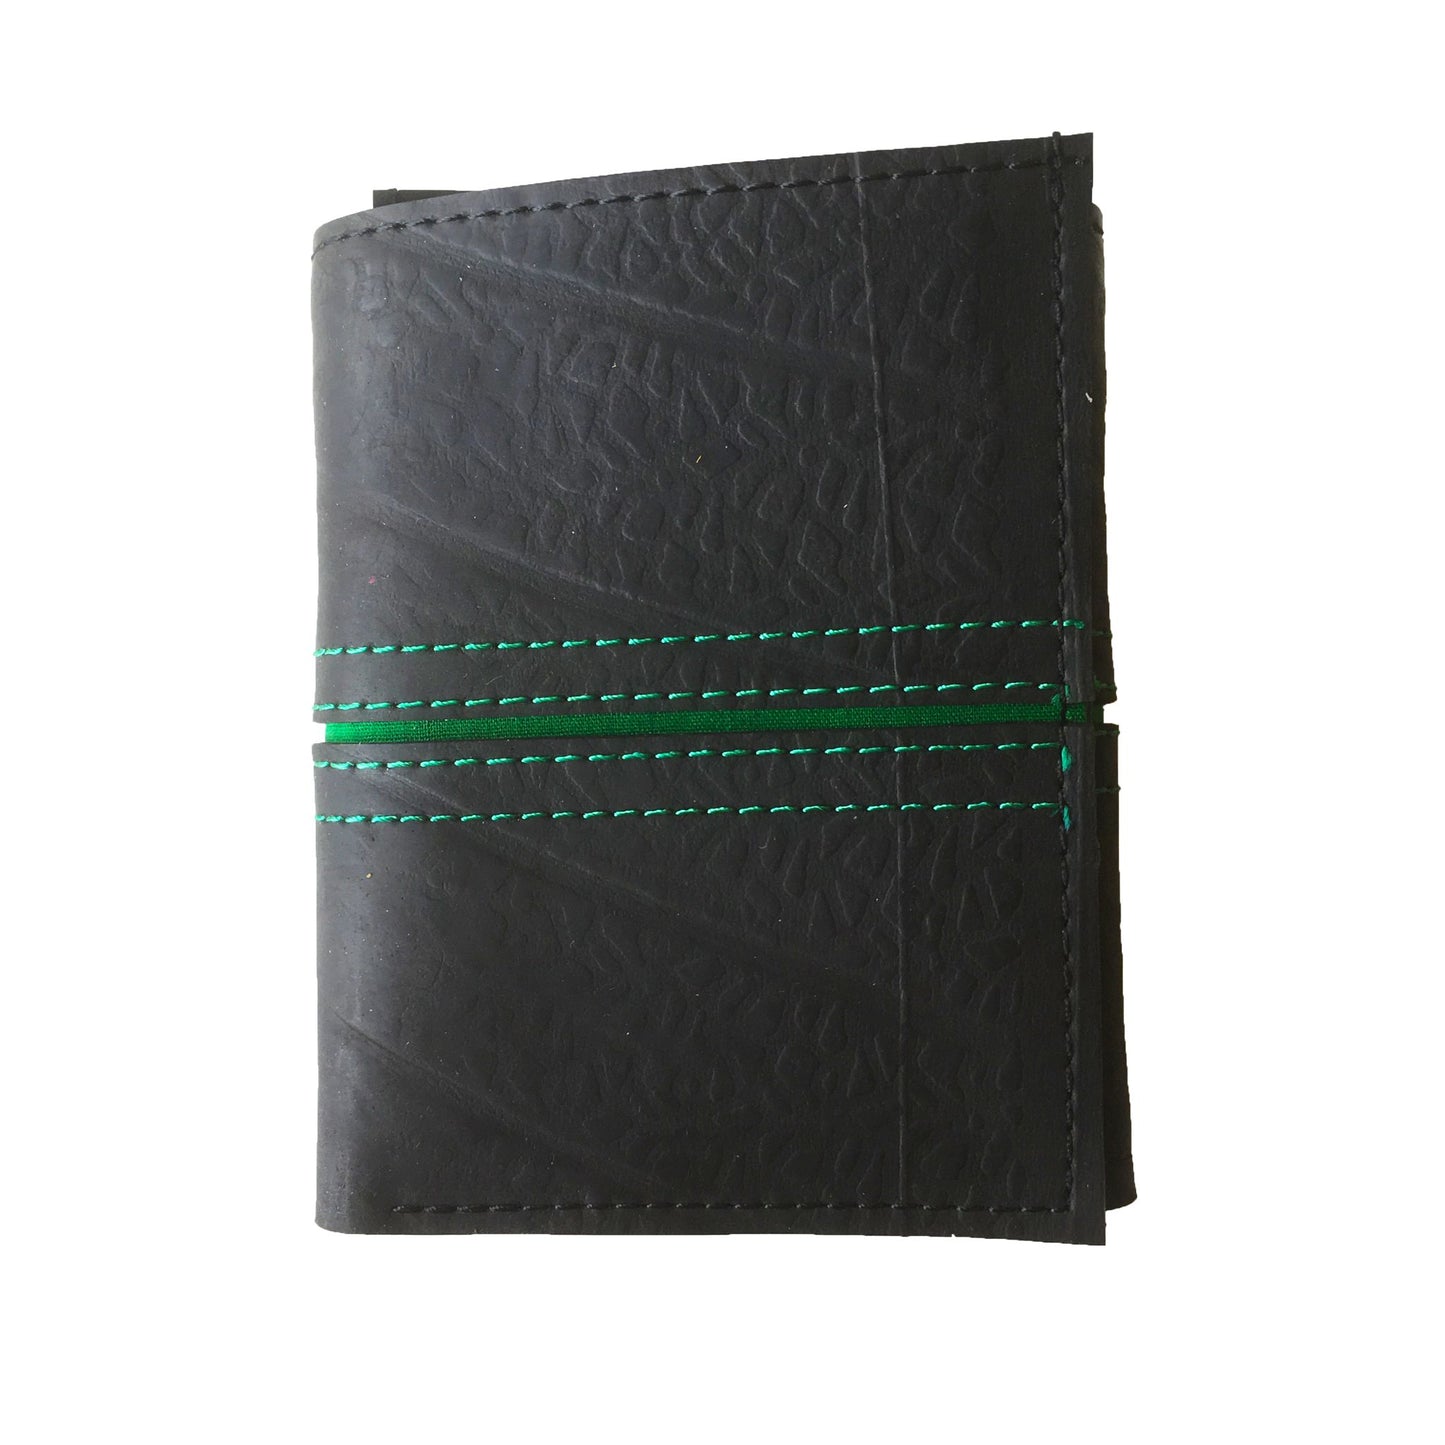 Trifold Recycled Wallet made from Inner Tubes - green thread